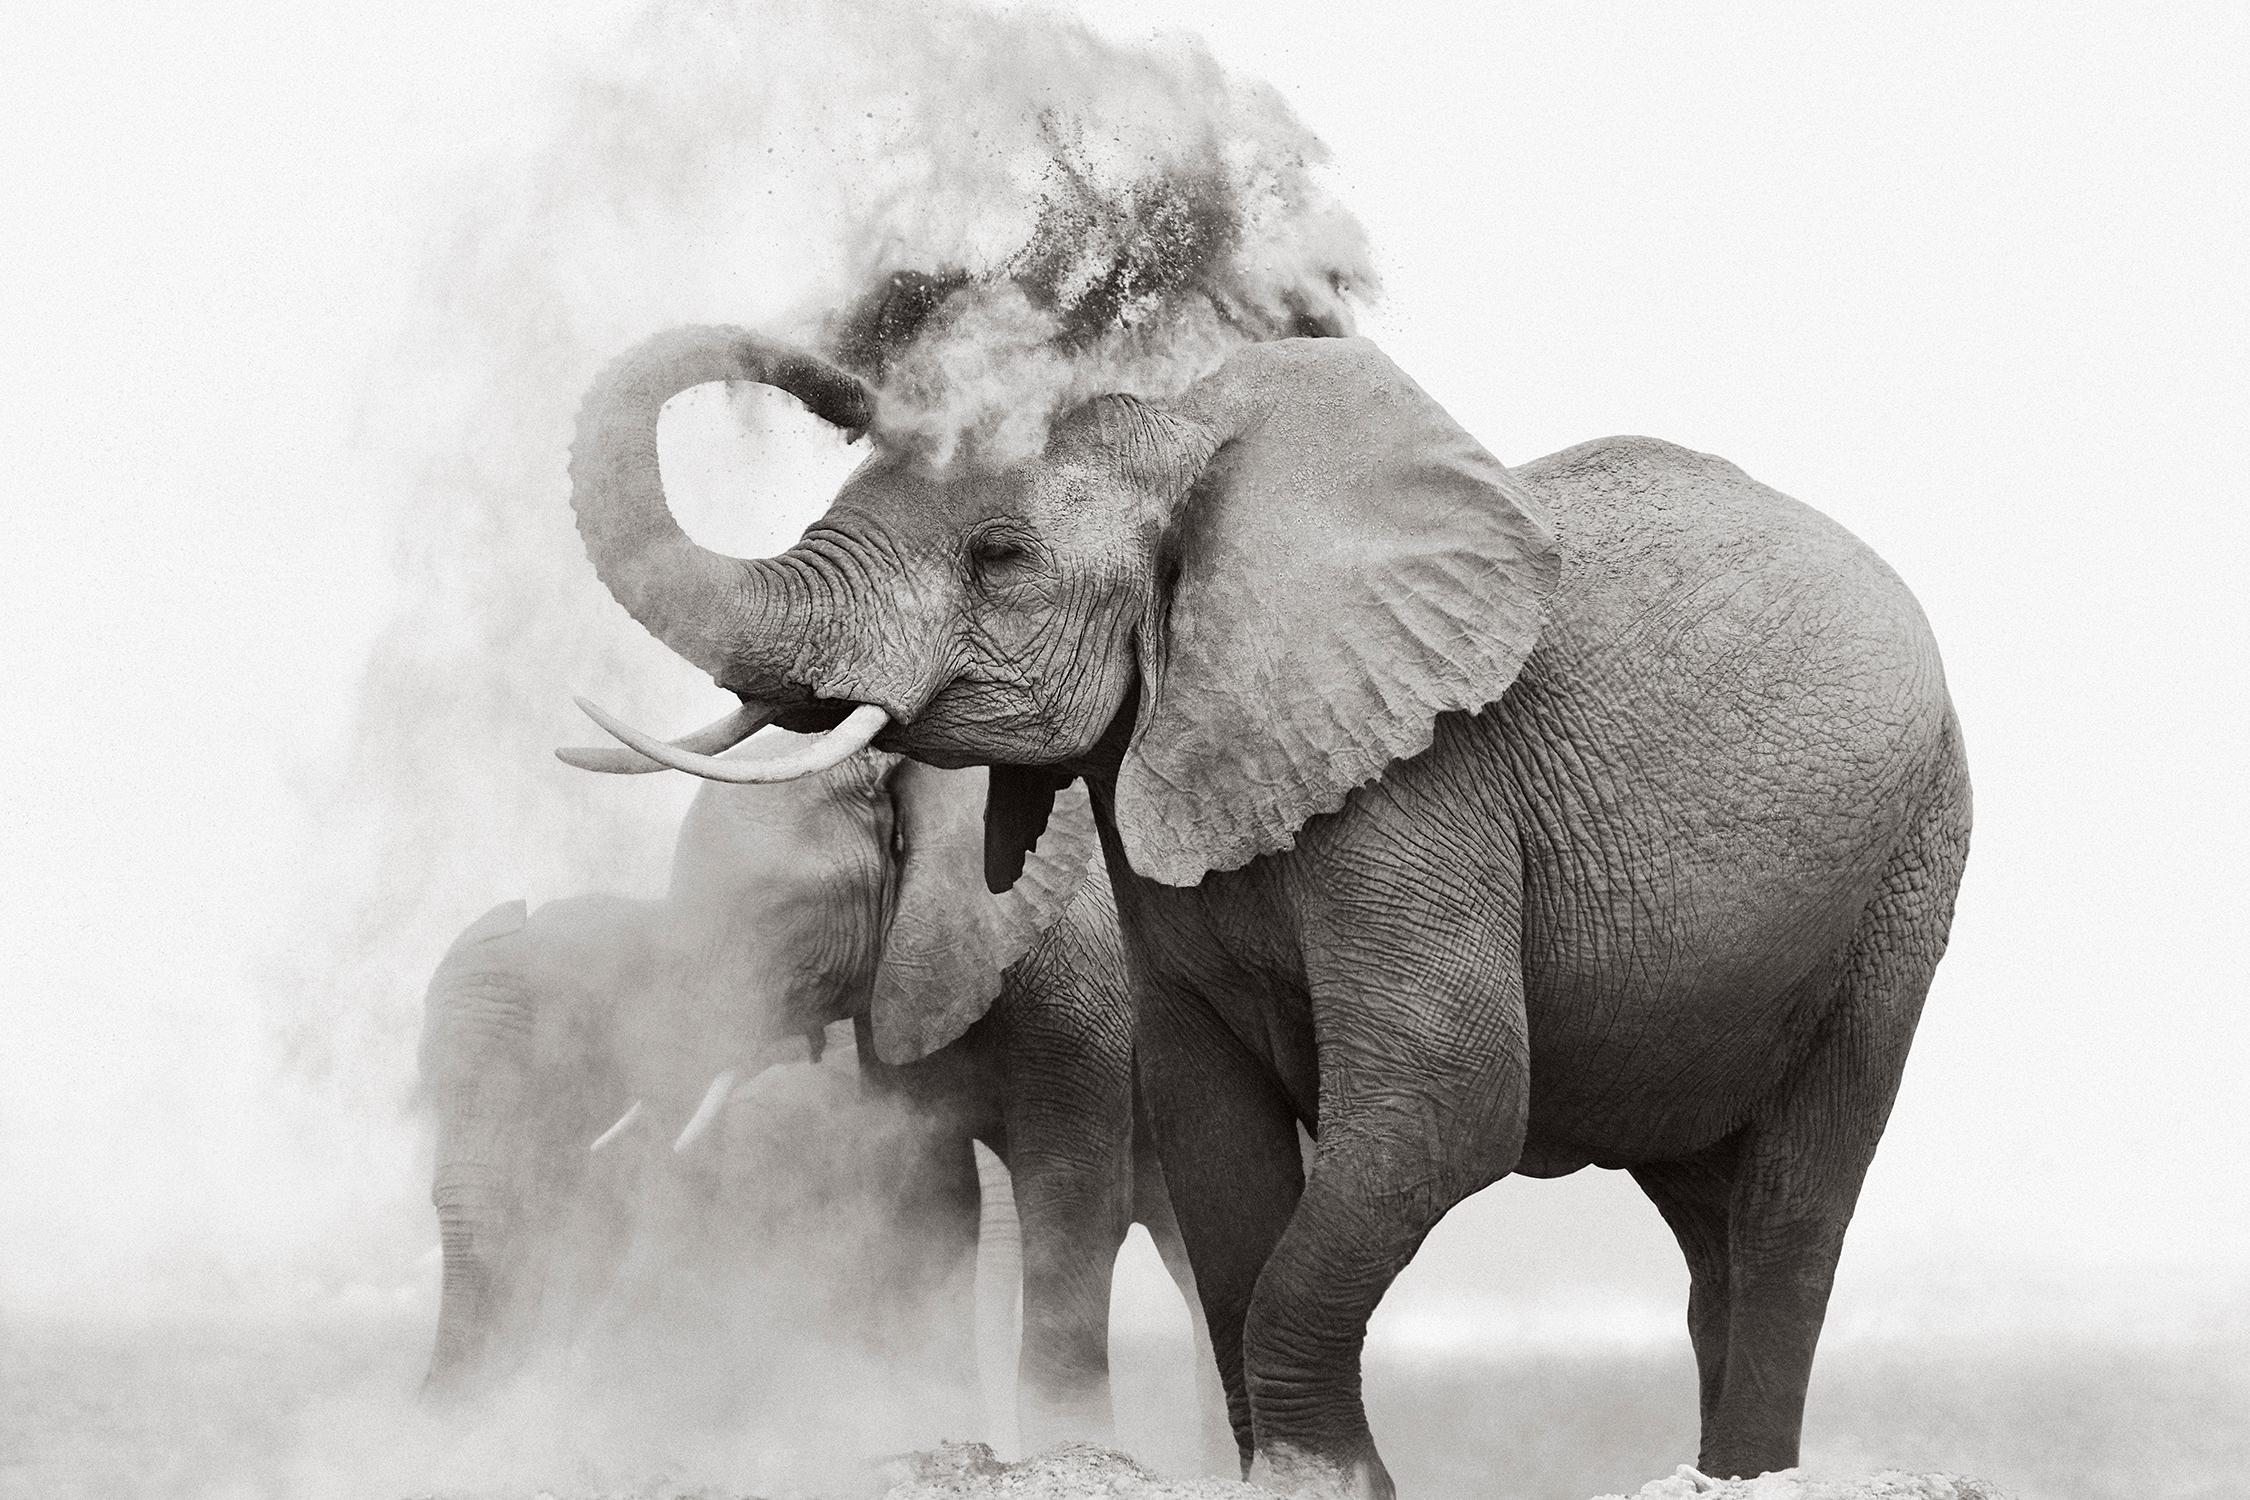 Drew Doggett Black and White Photograph - Surreal Portrait of an Elephant with Dust in Kenya, Minimal, Fashion-Inspired